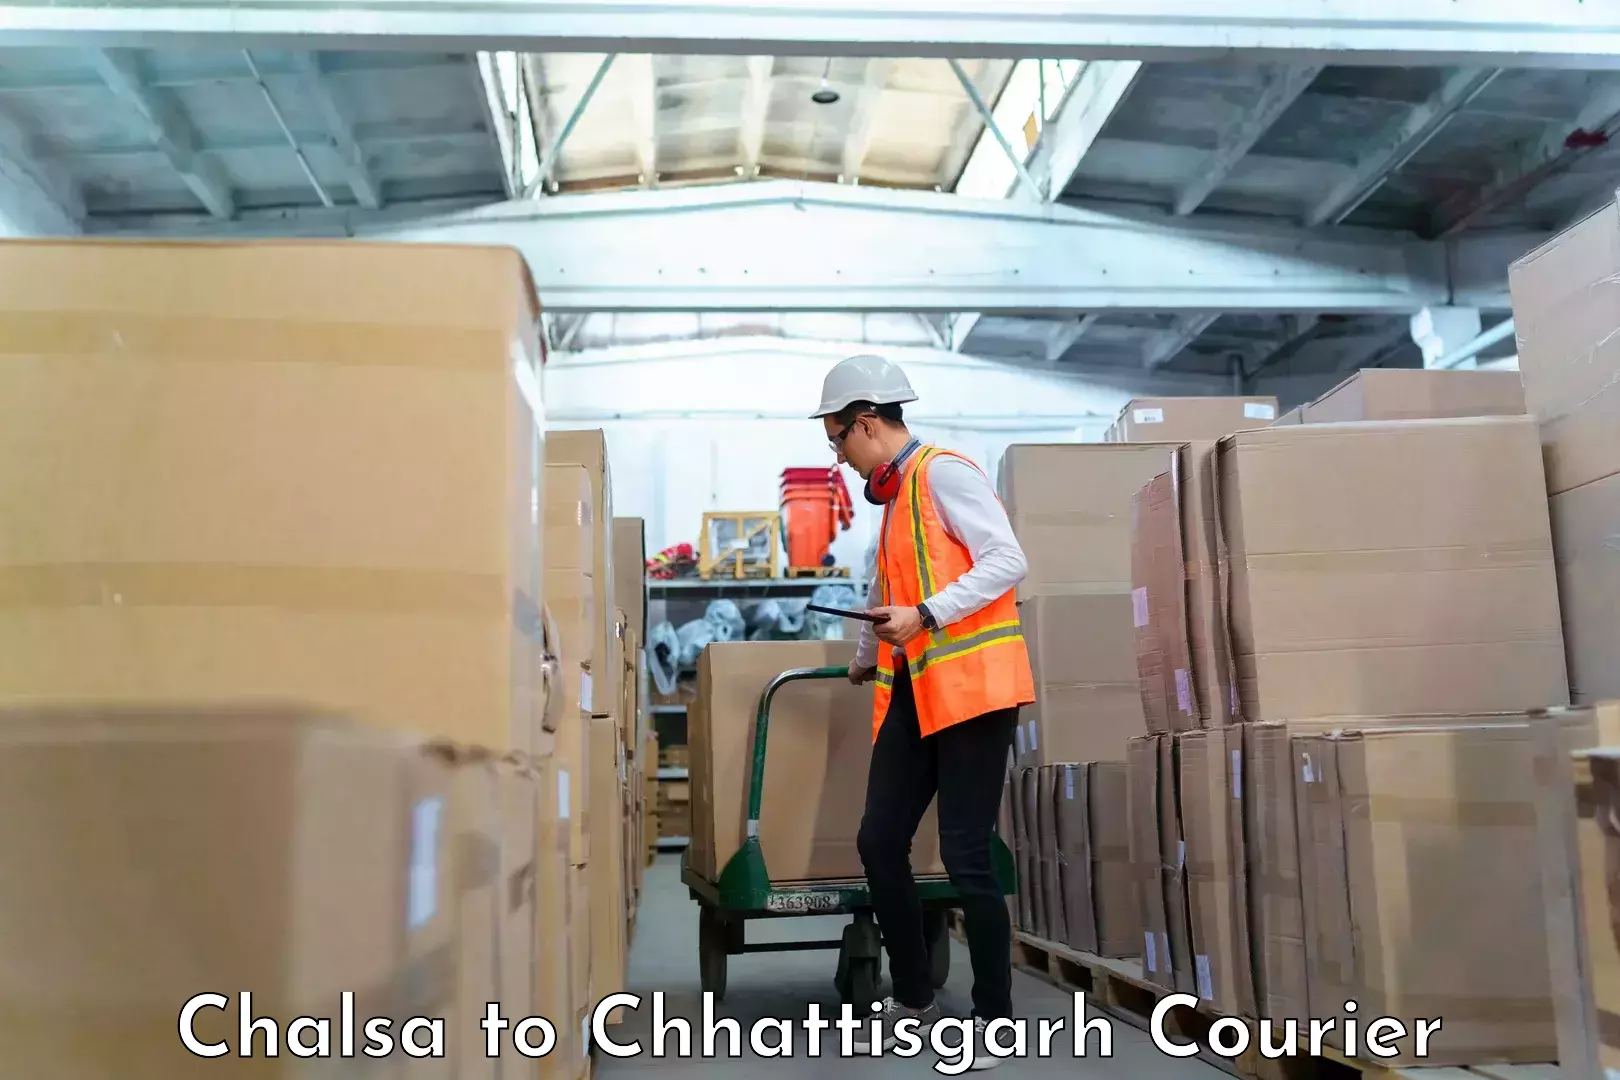 Luggage transport consultancy Chalsa to Lailunga